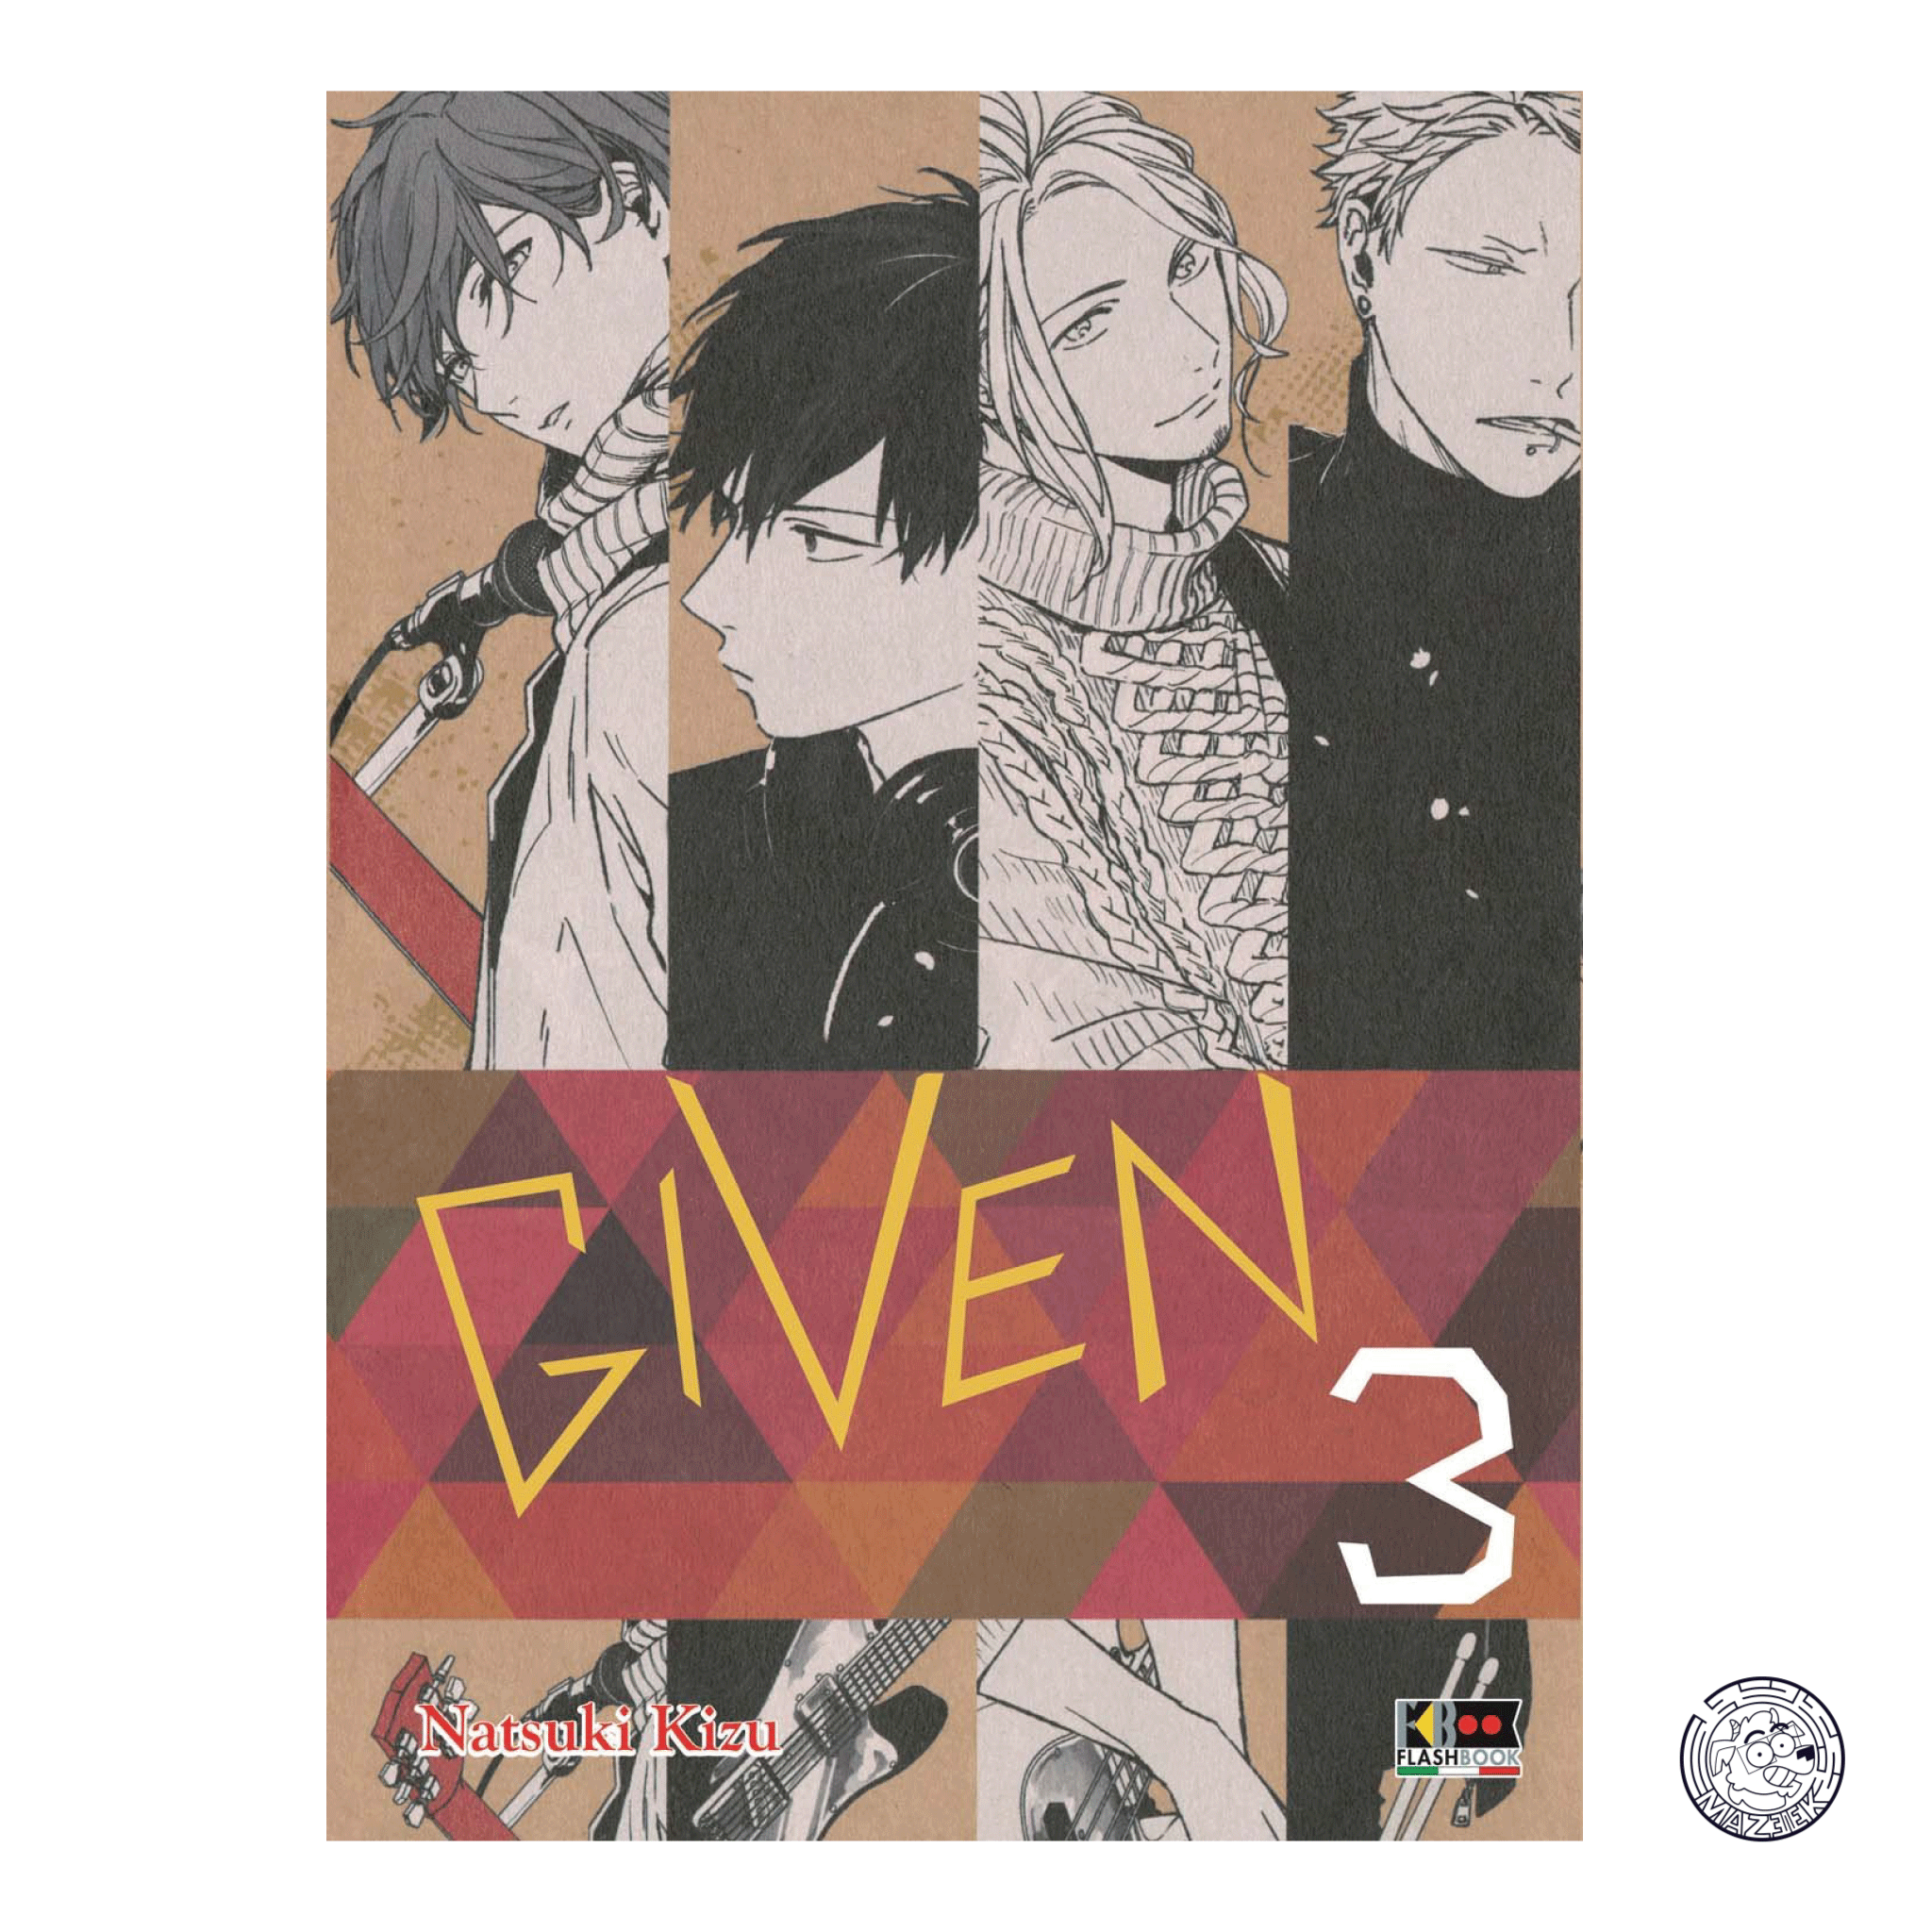 Given 03